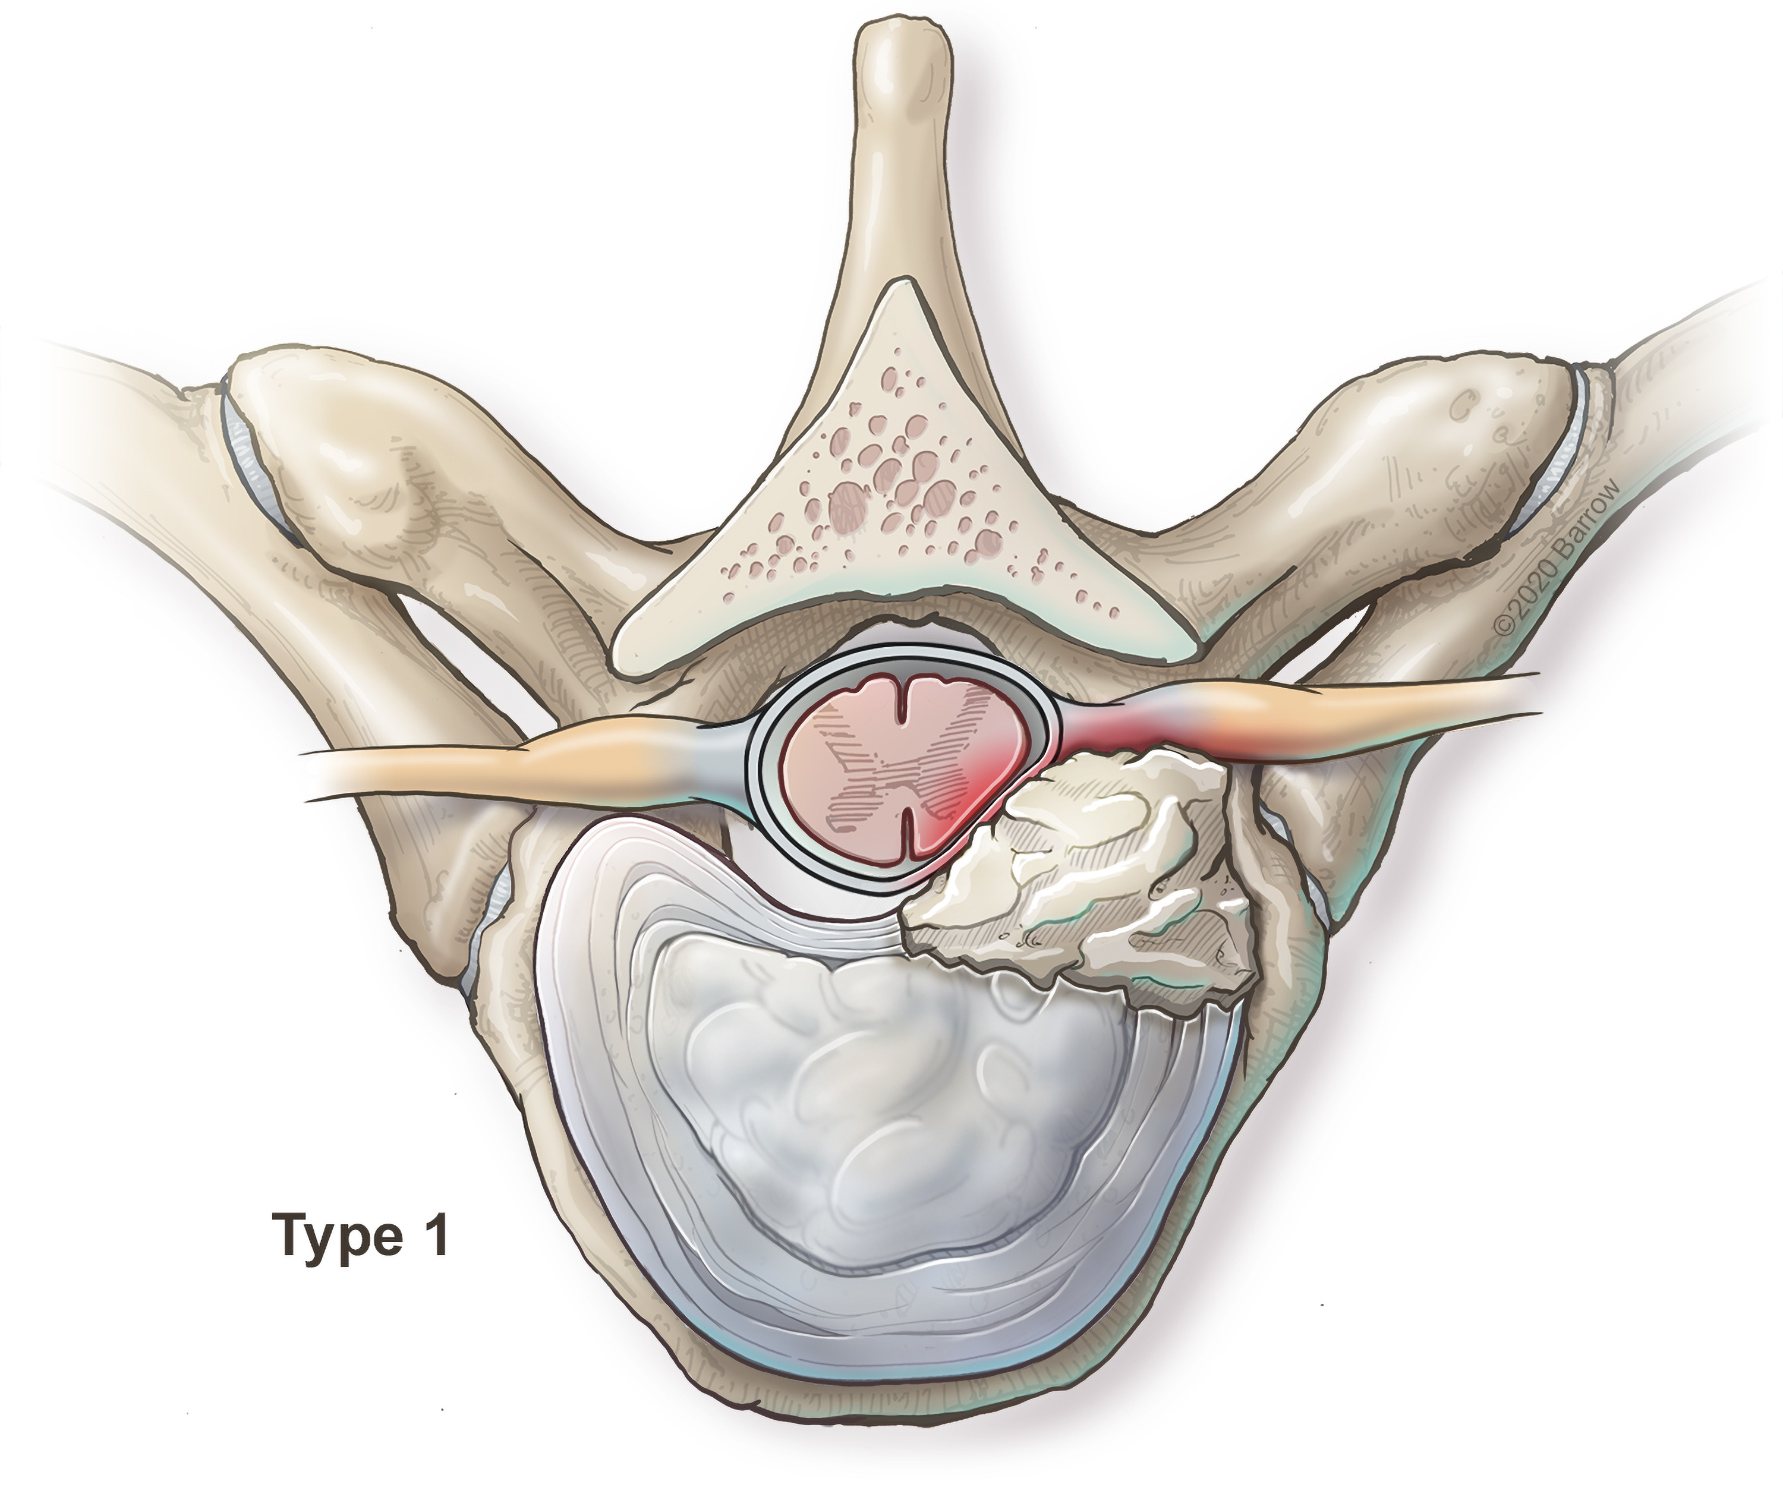 Herniated Disc (Ruptured or Slipped Spinal Disc)